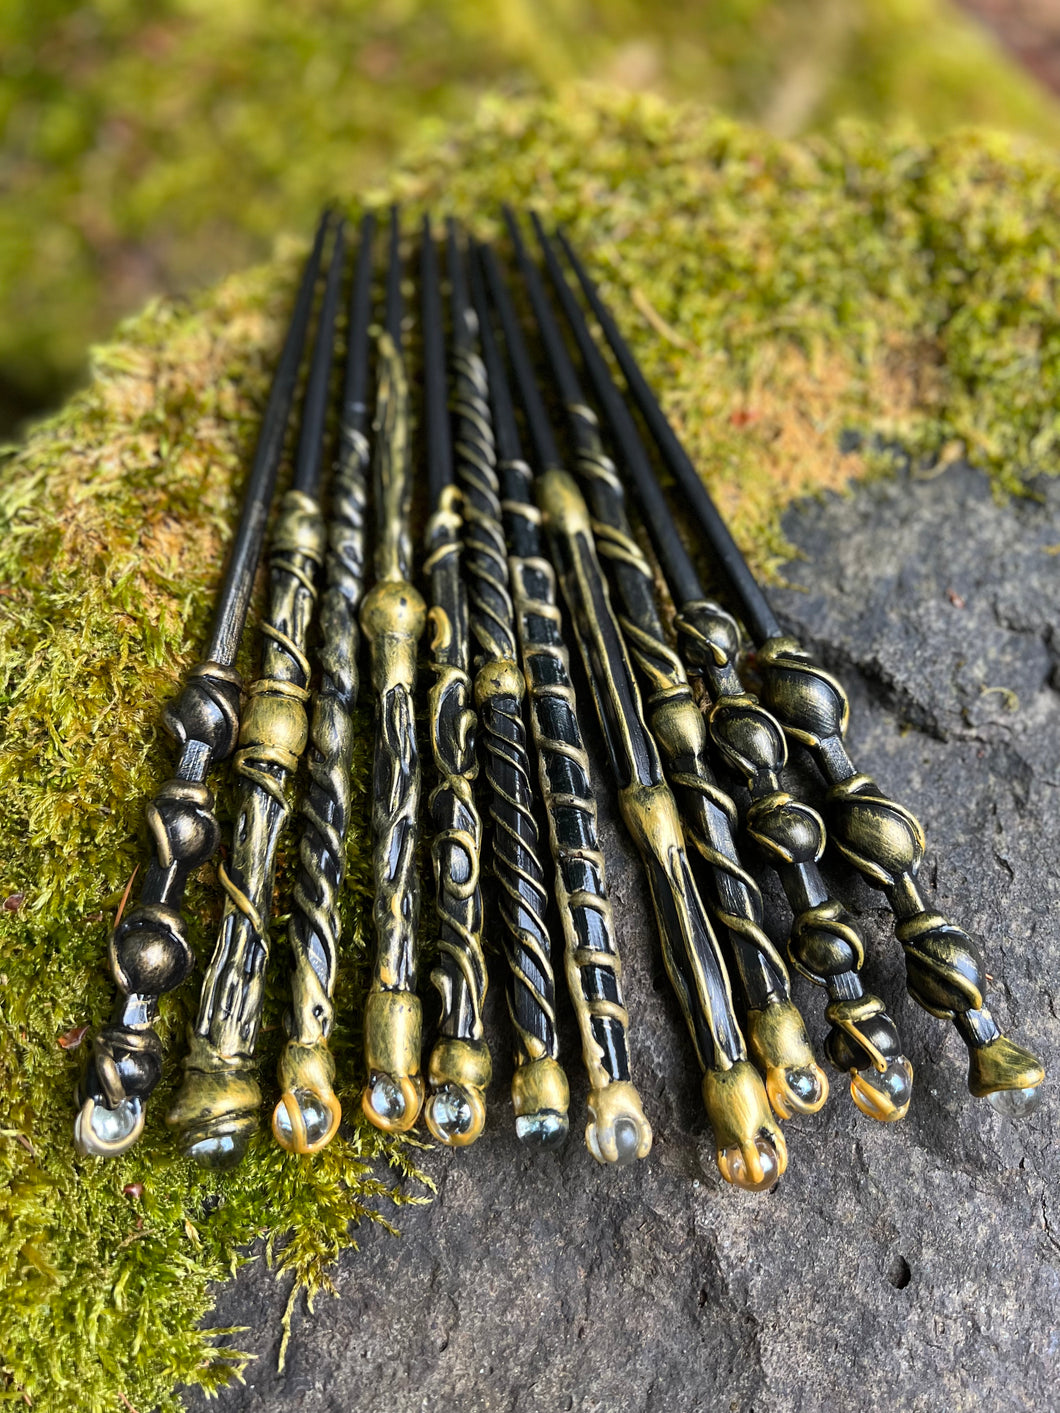 Black and Gold Magic Wands